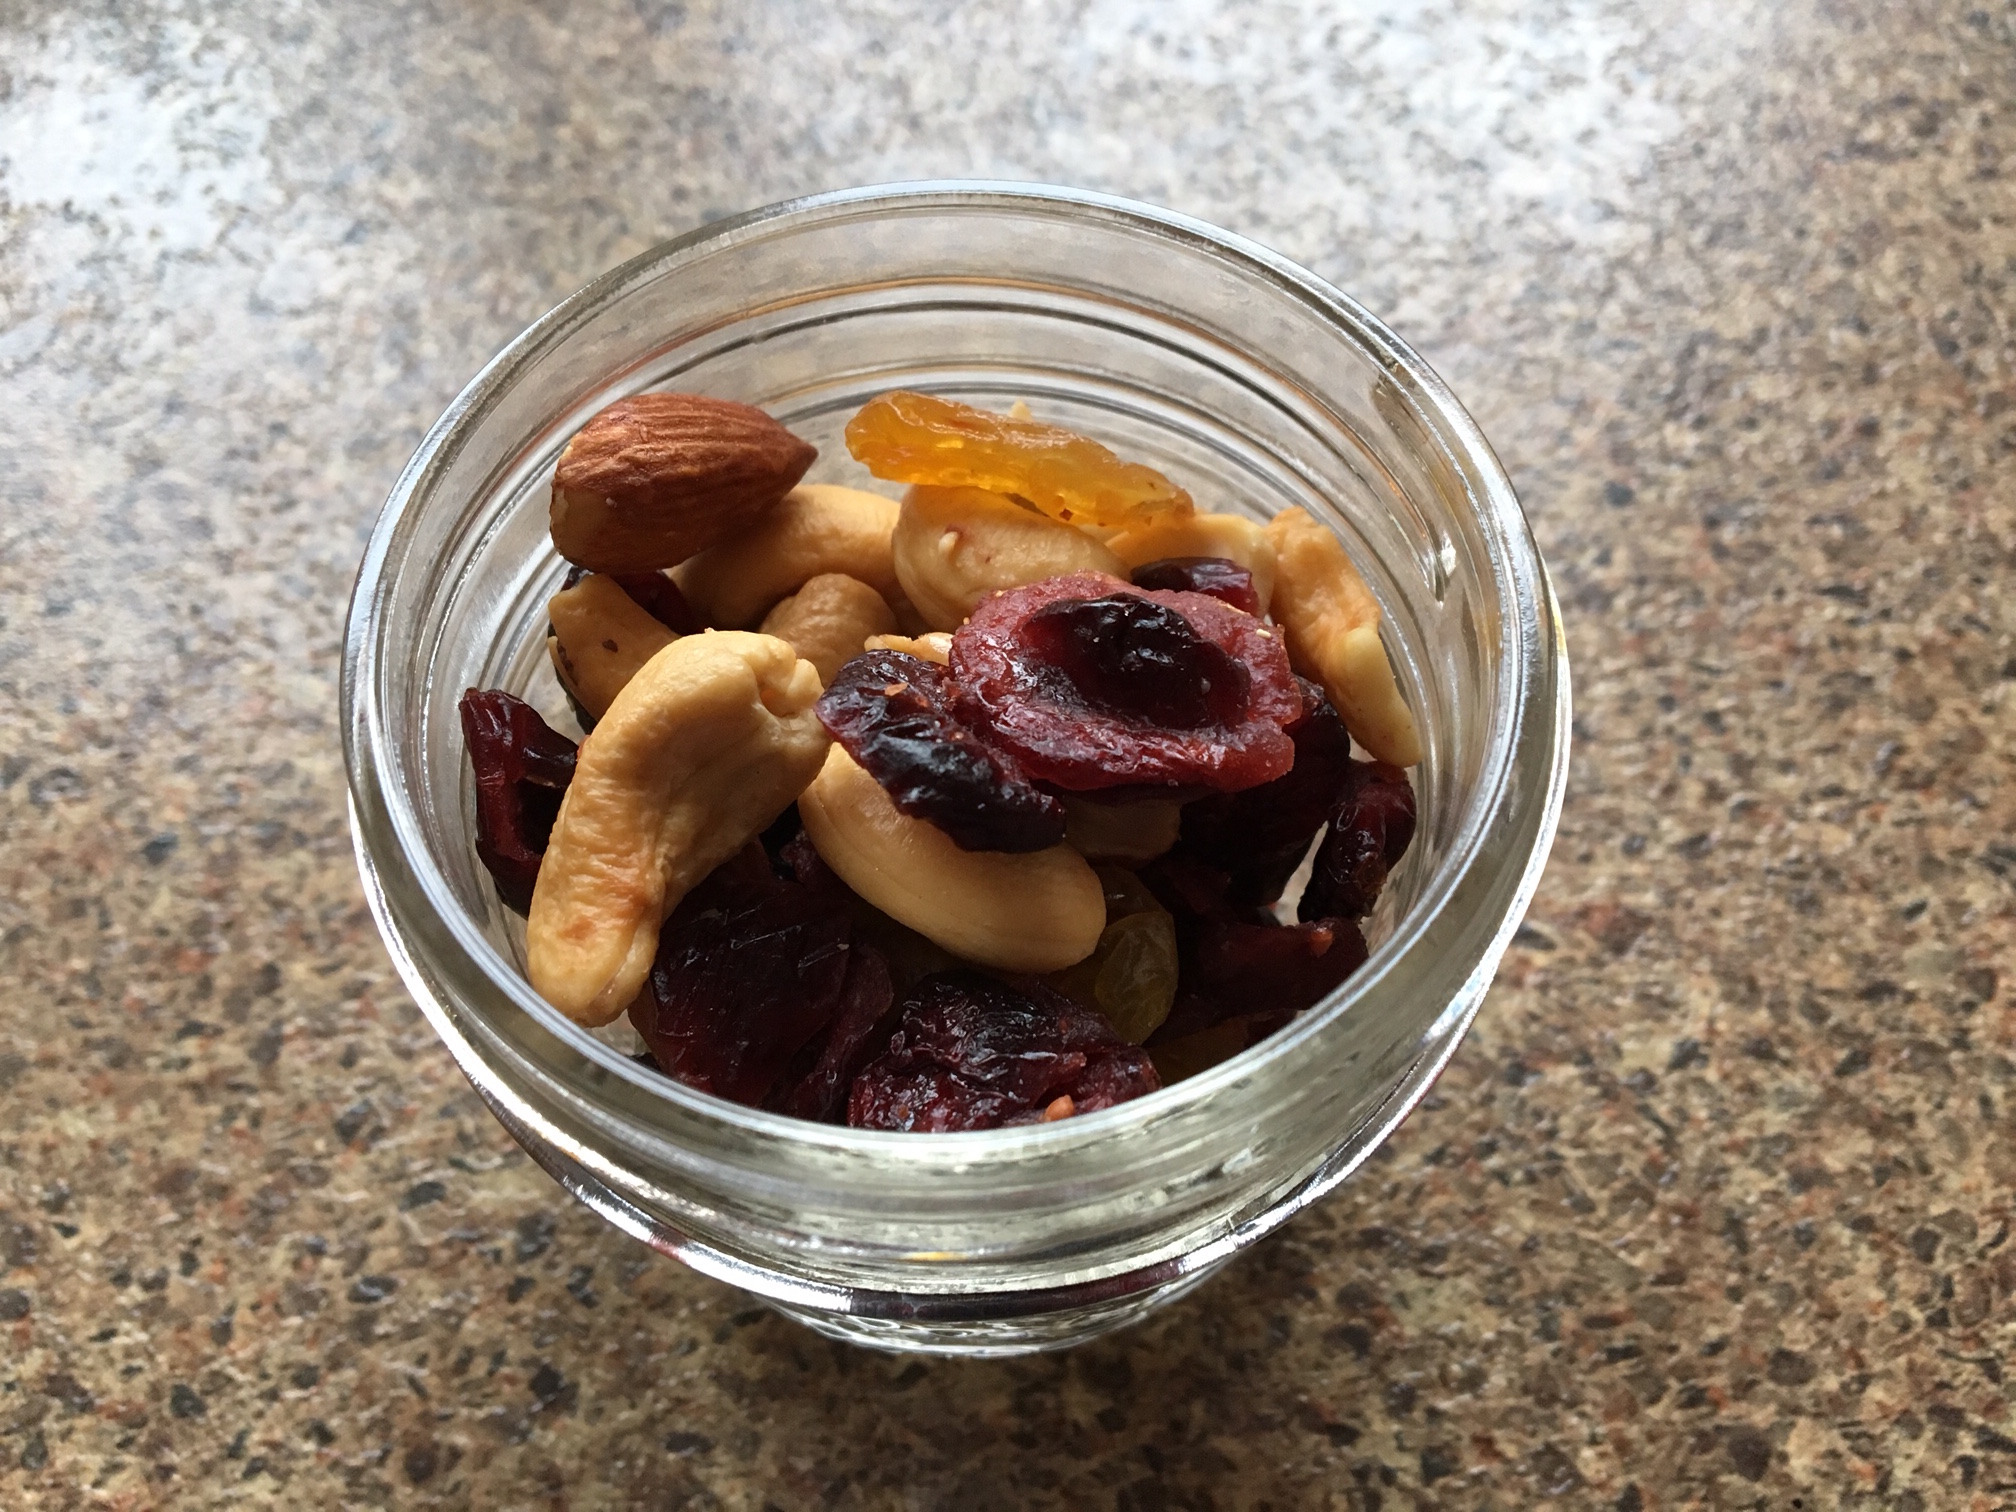 Mixed nuts and dried fruit